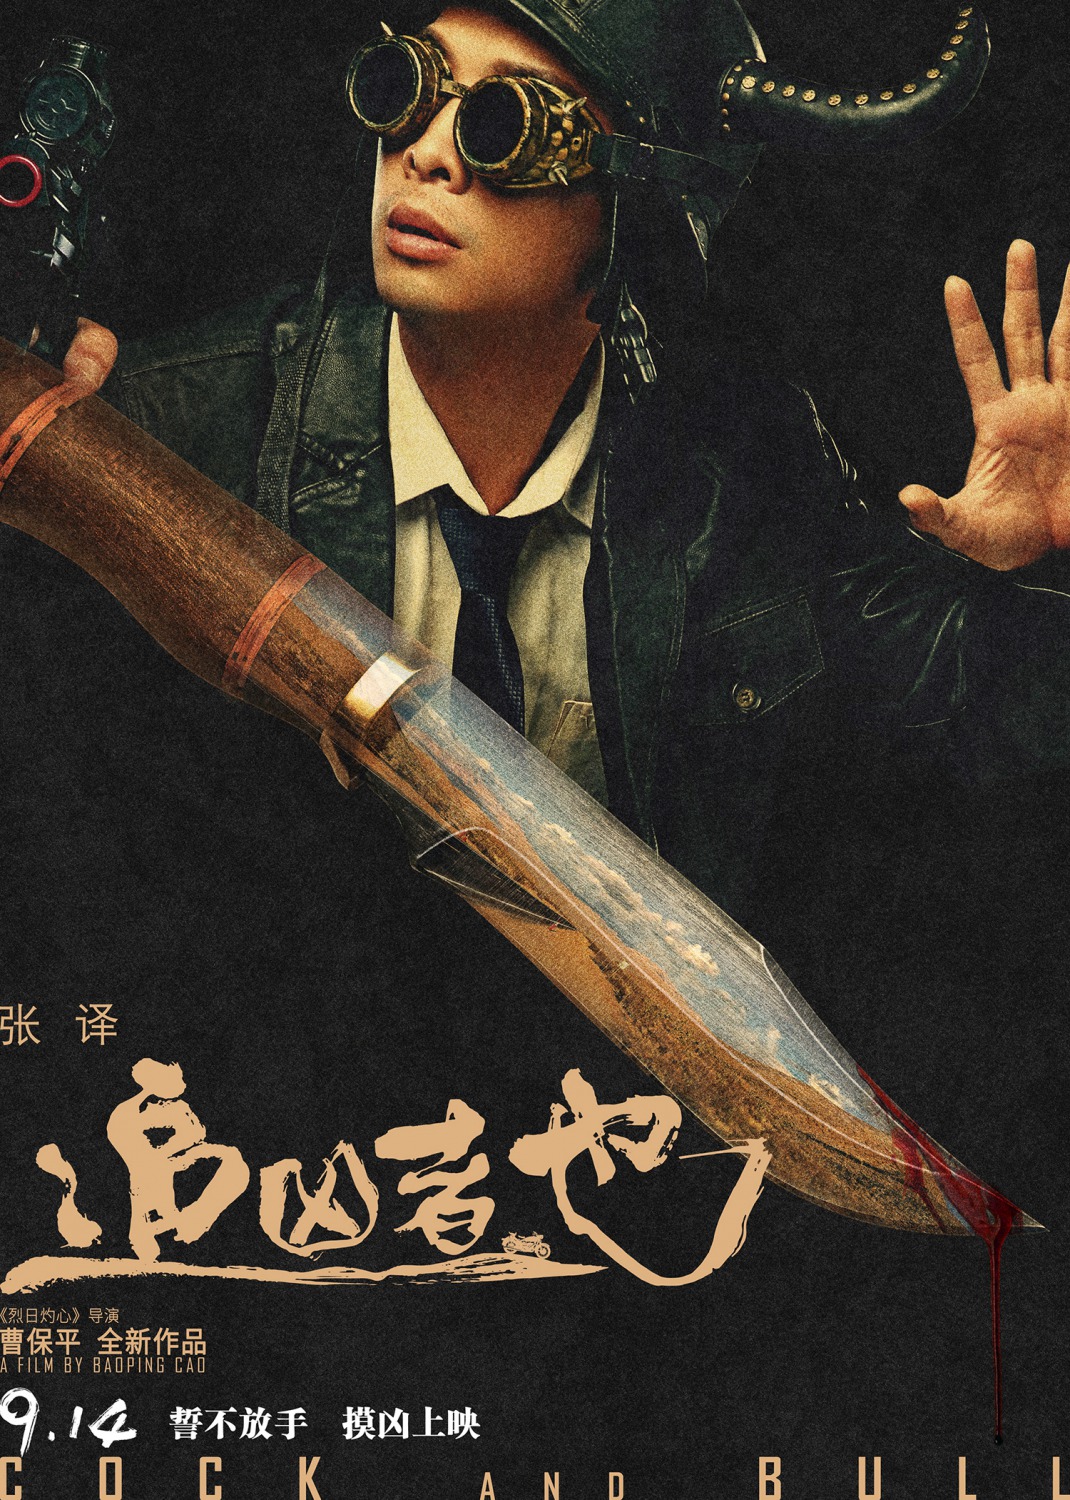 Extra Large Movie Poster Image for Zhui xiong zhe ye (#10 of 16)